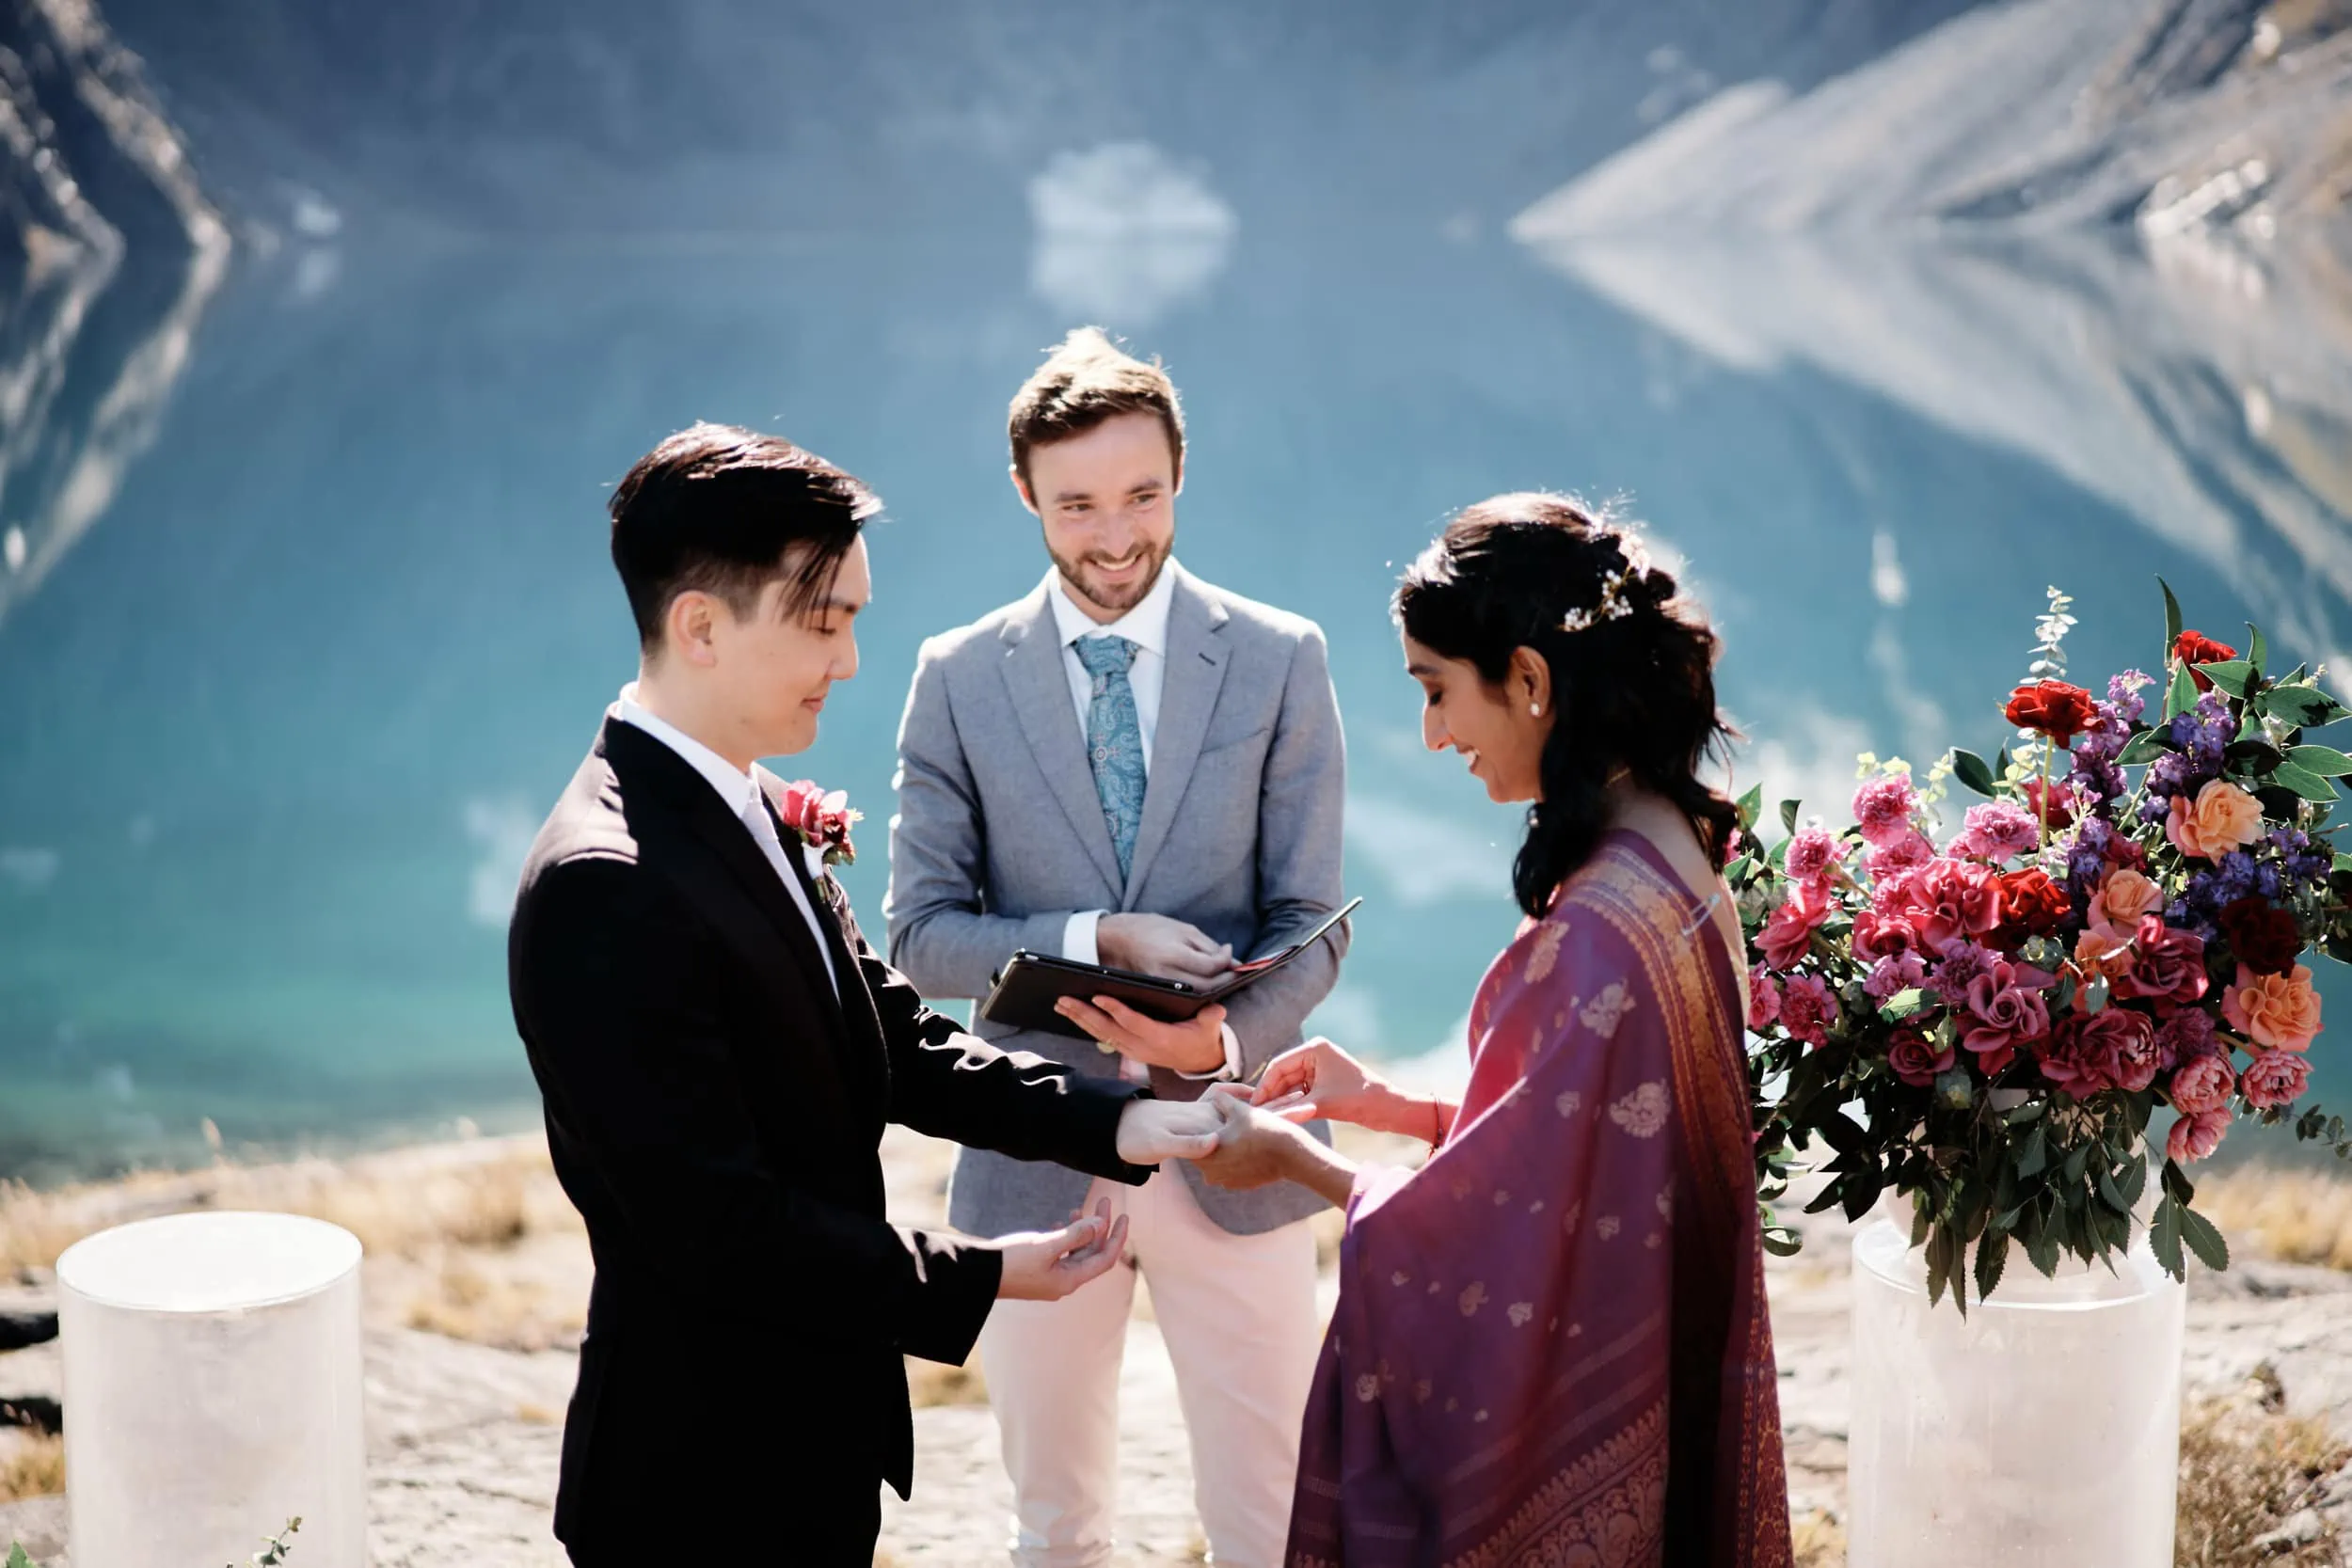 A bride and groom exchange rings in front of a lake.